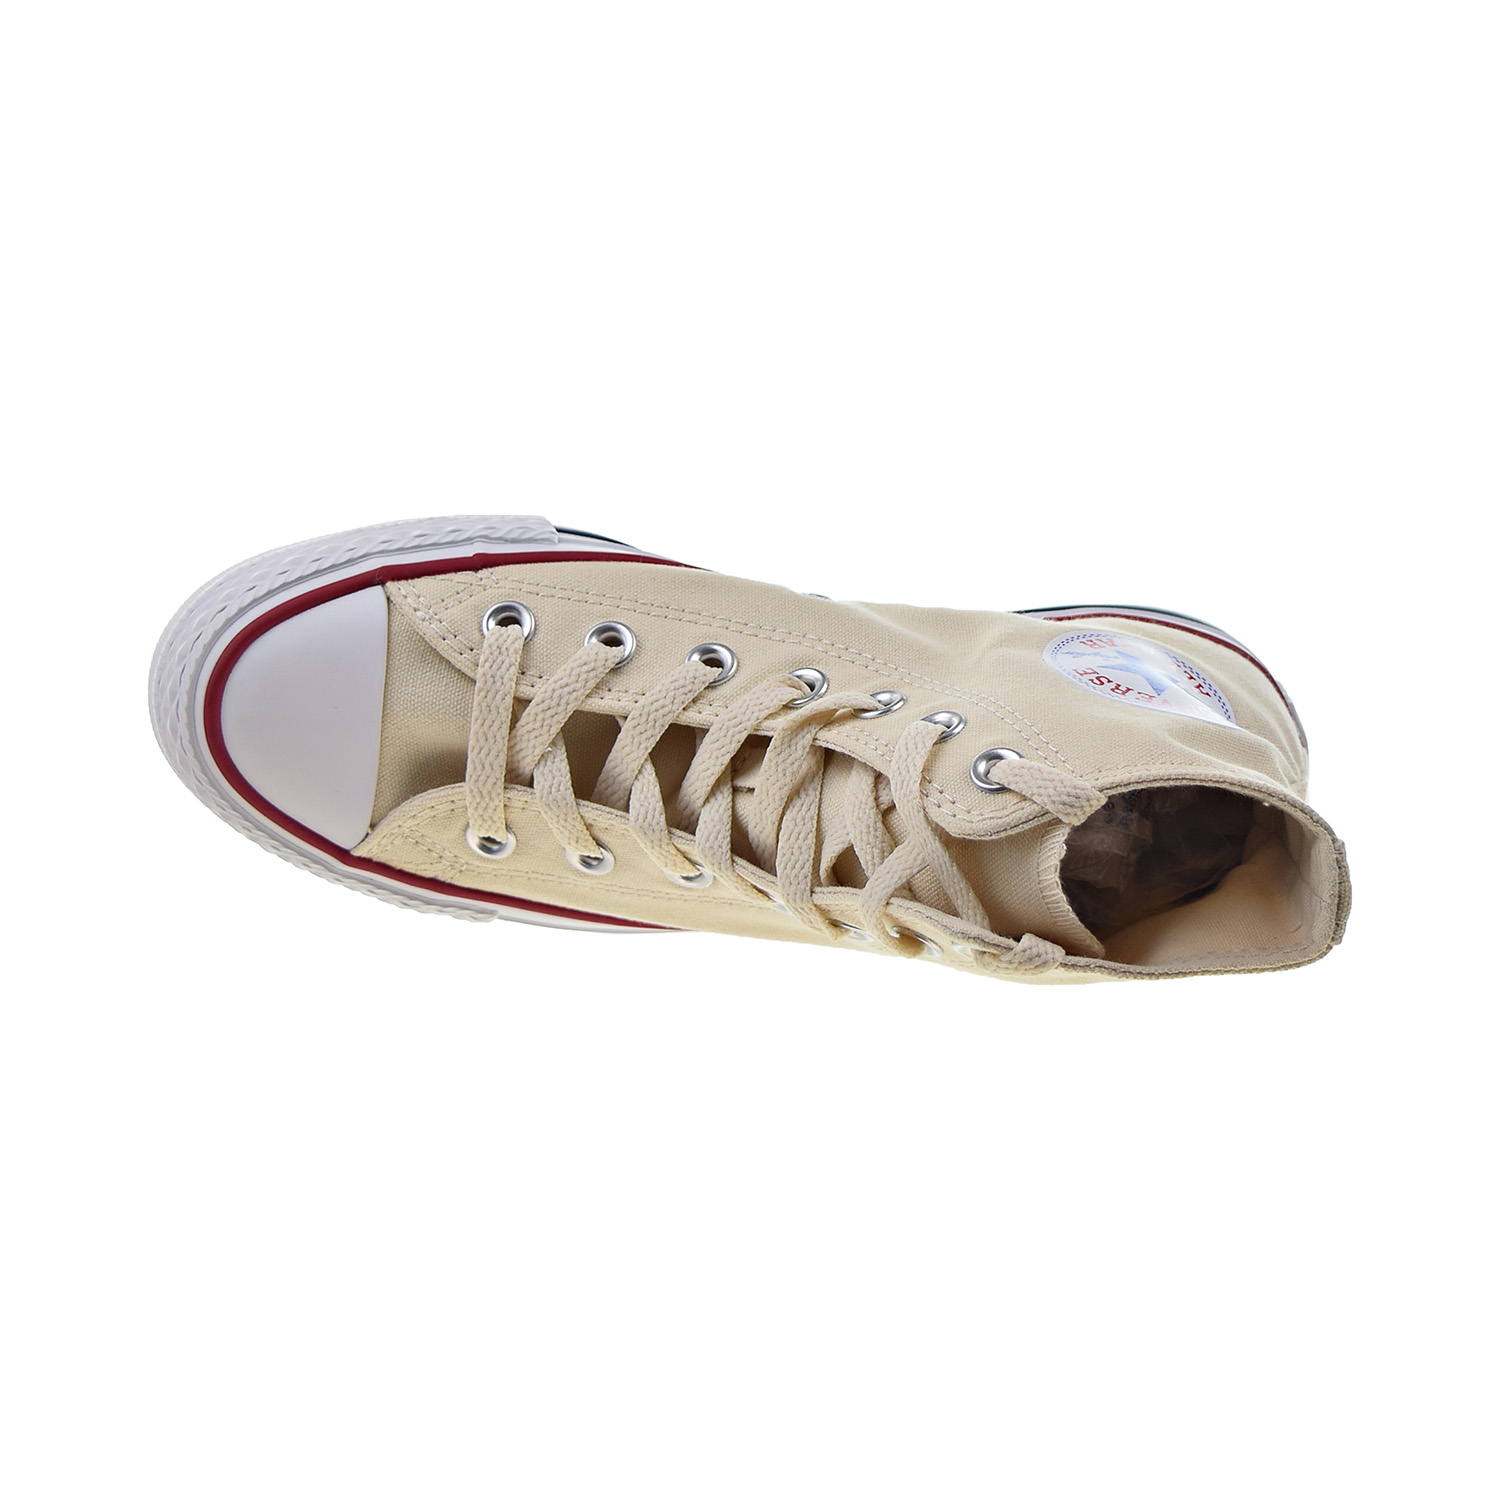 Converse Chuck Taylor All Star High Top Sneaker - image 5 of 6